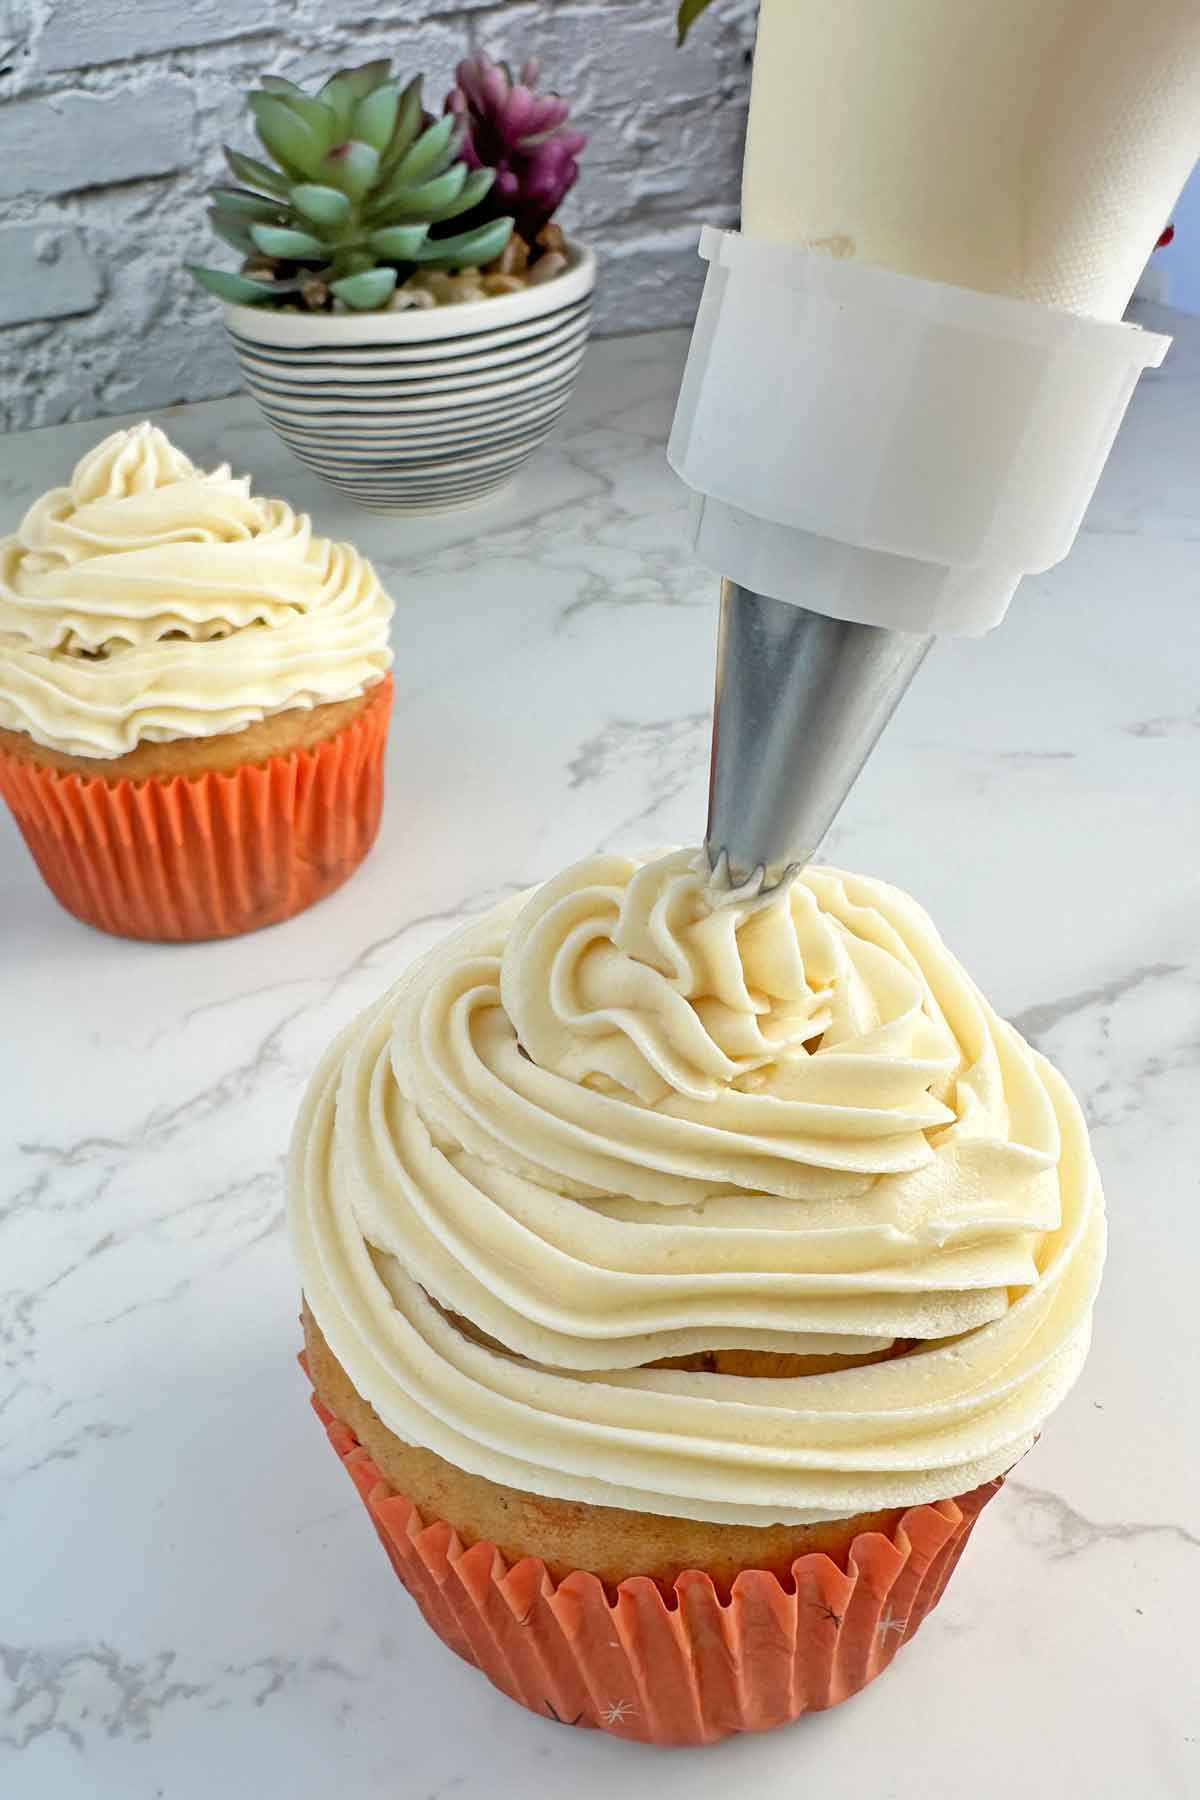 defrosted buttercream frosting for piping.